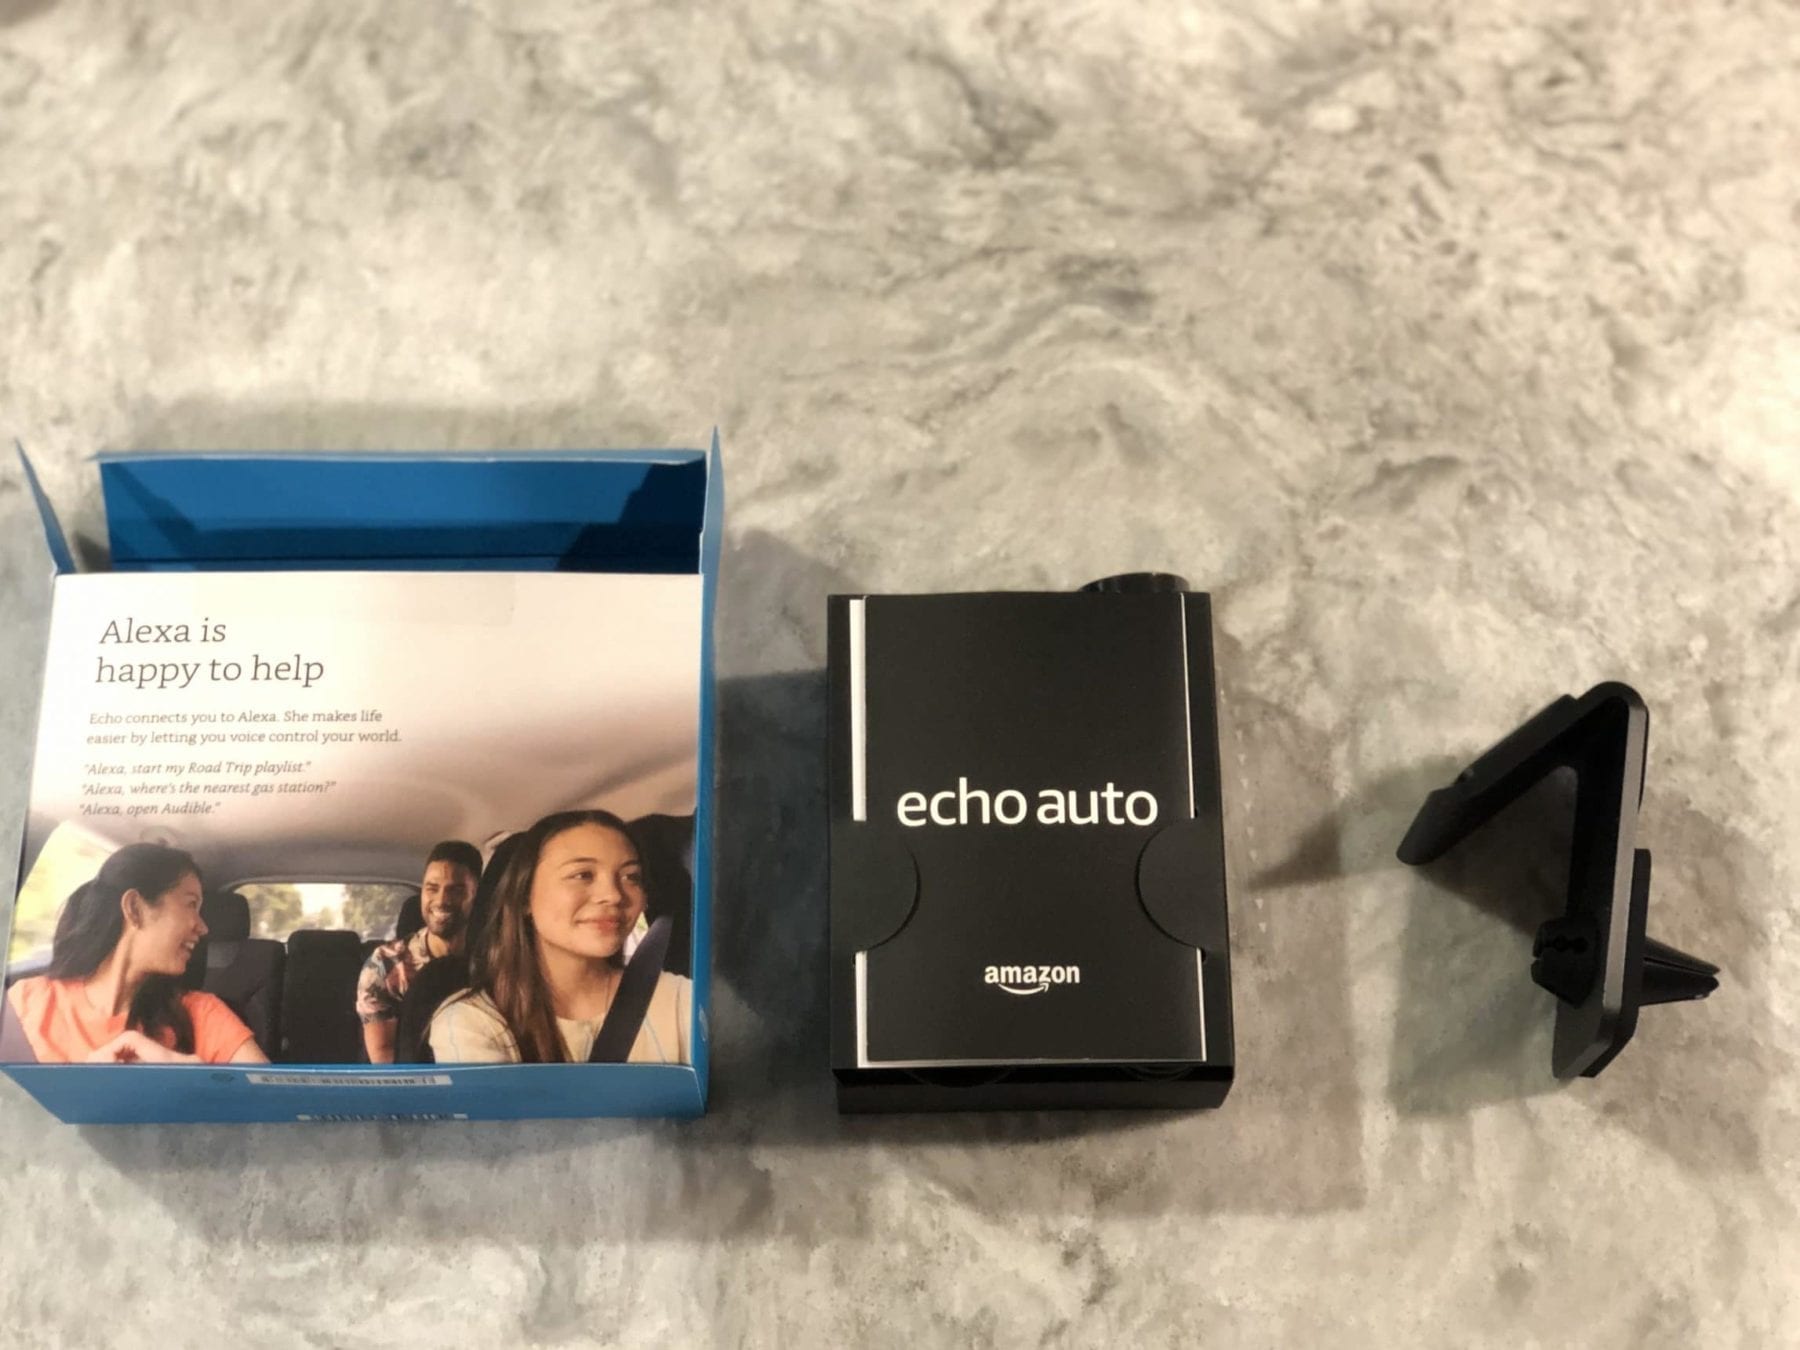 Echo auto pulling out of the package